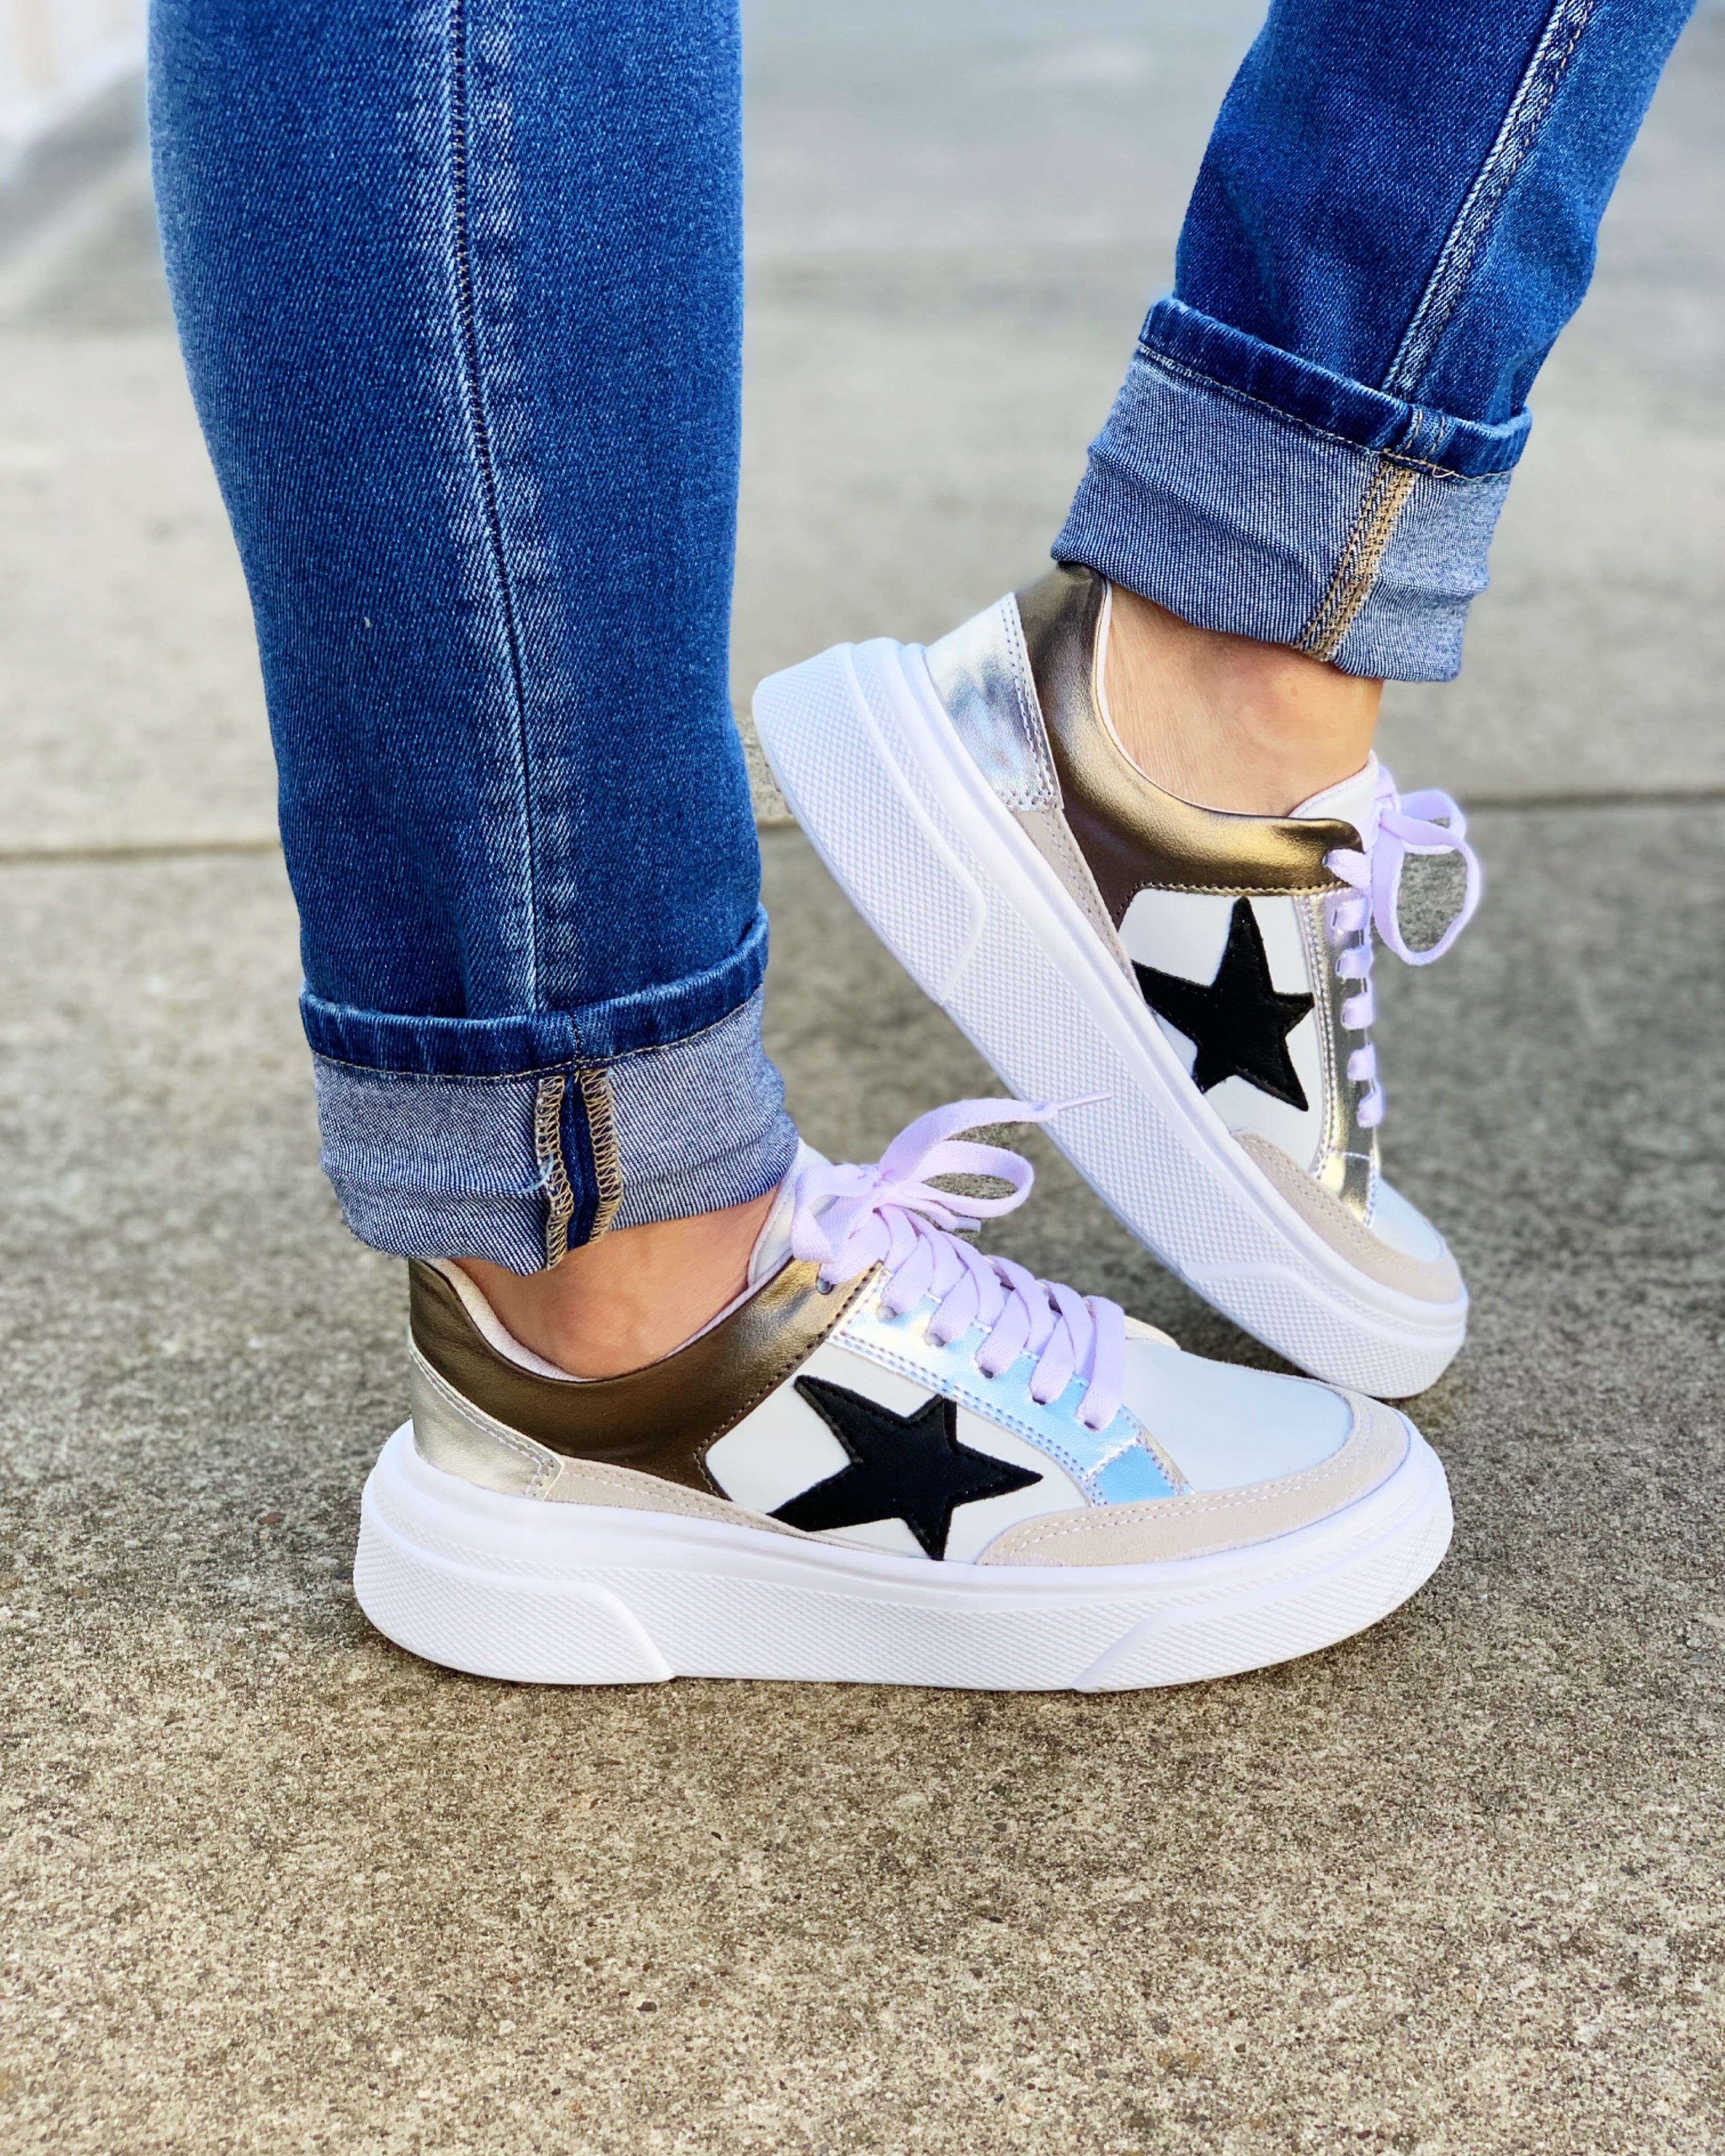 Youre A Shining Star Sneakers-Pewter - Infinity Raine